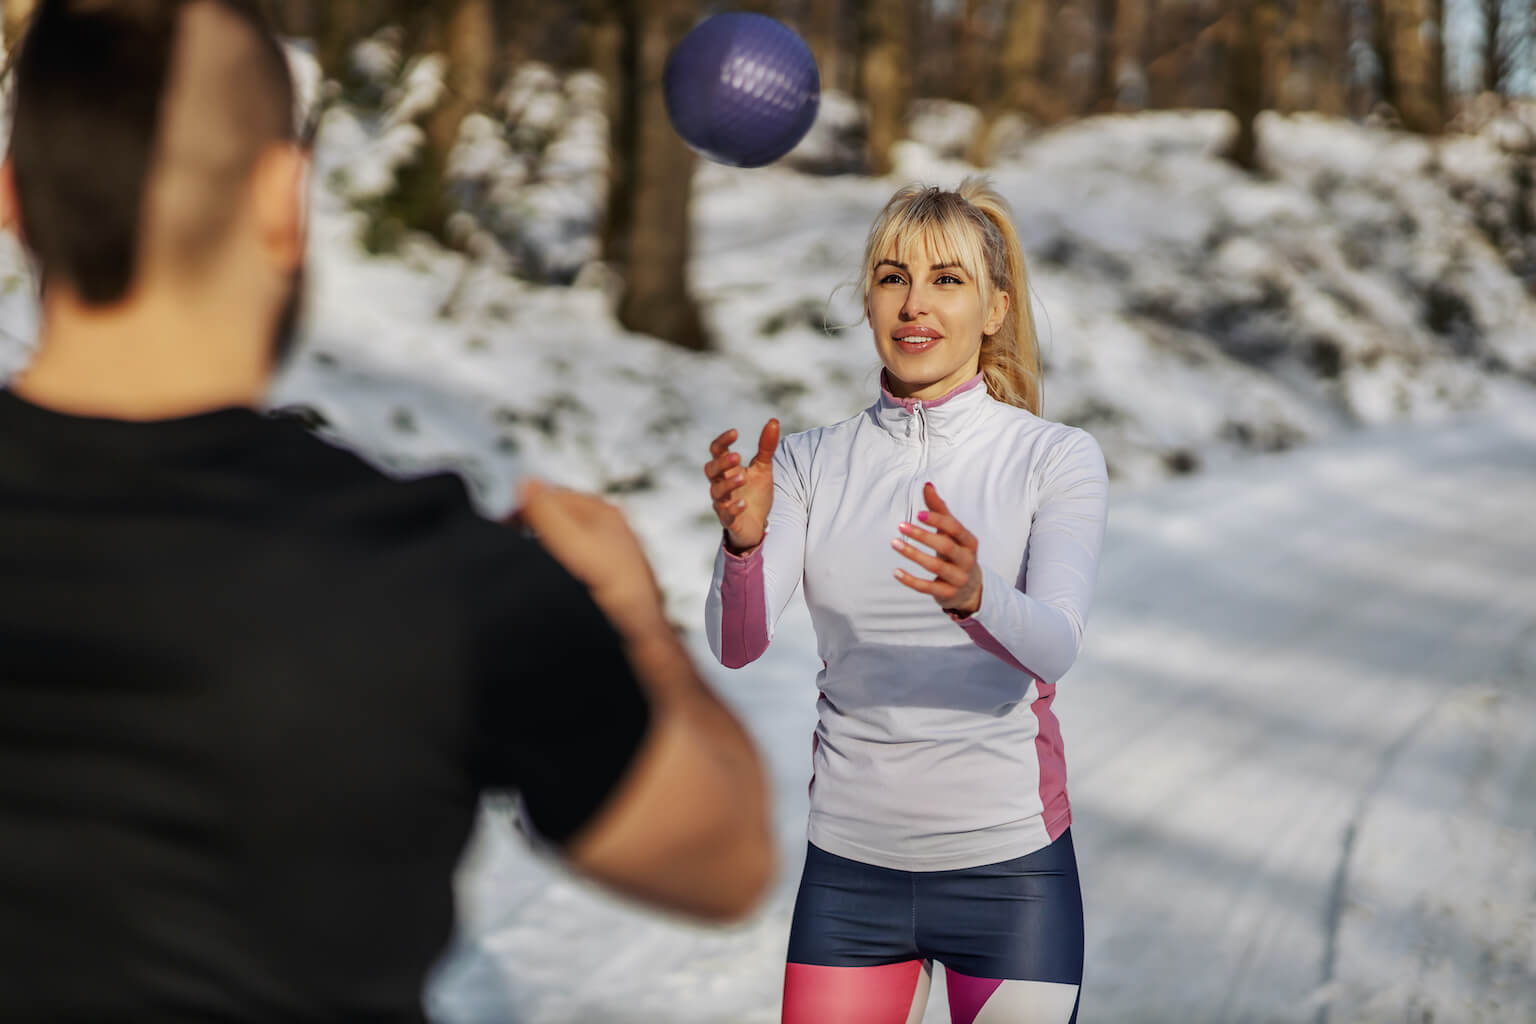 Woman catching purple ball in snowy landscape during winter training, with blurred man in foreground.